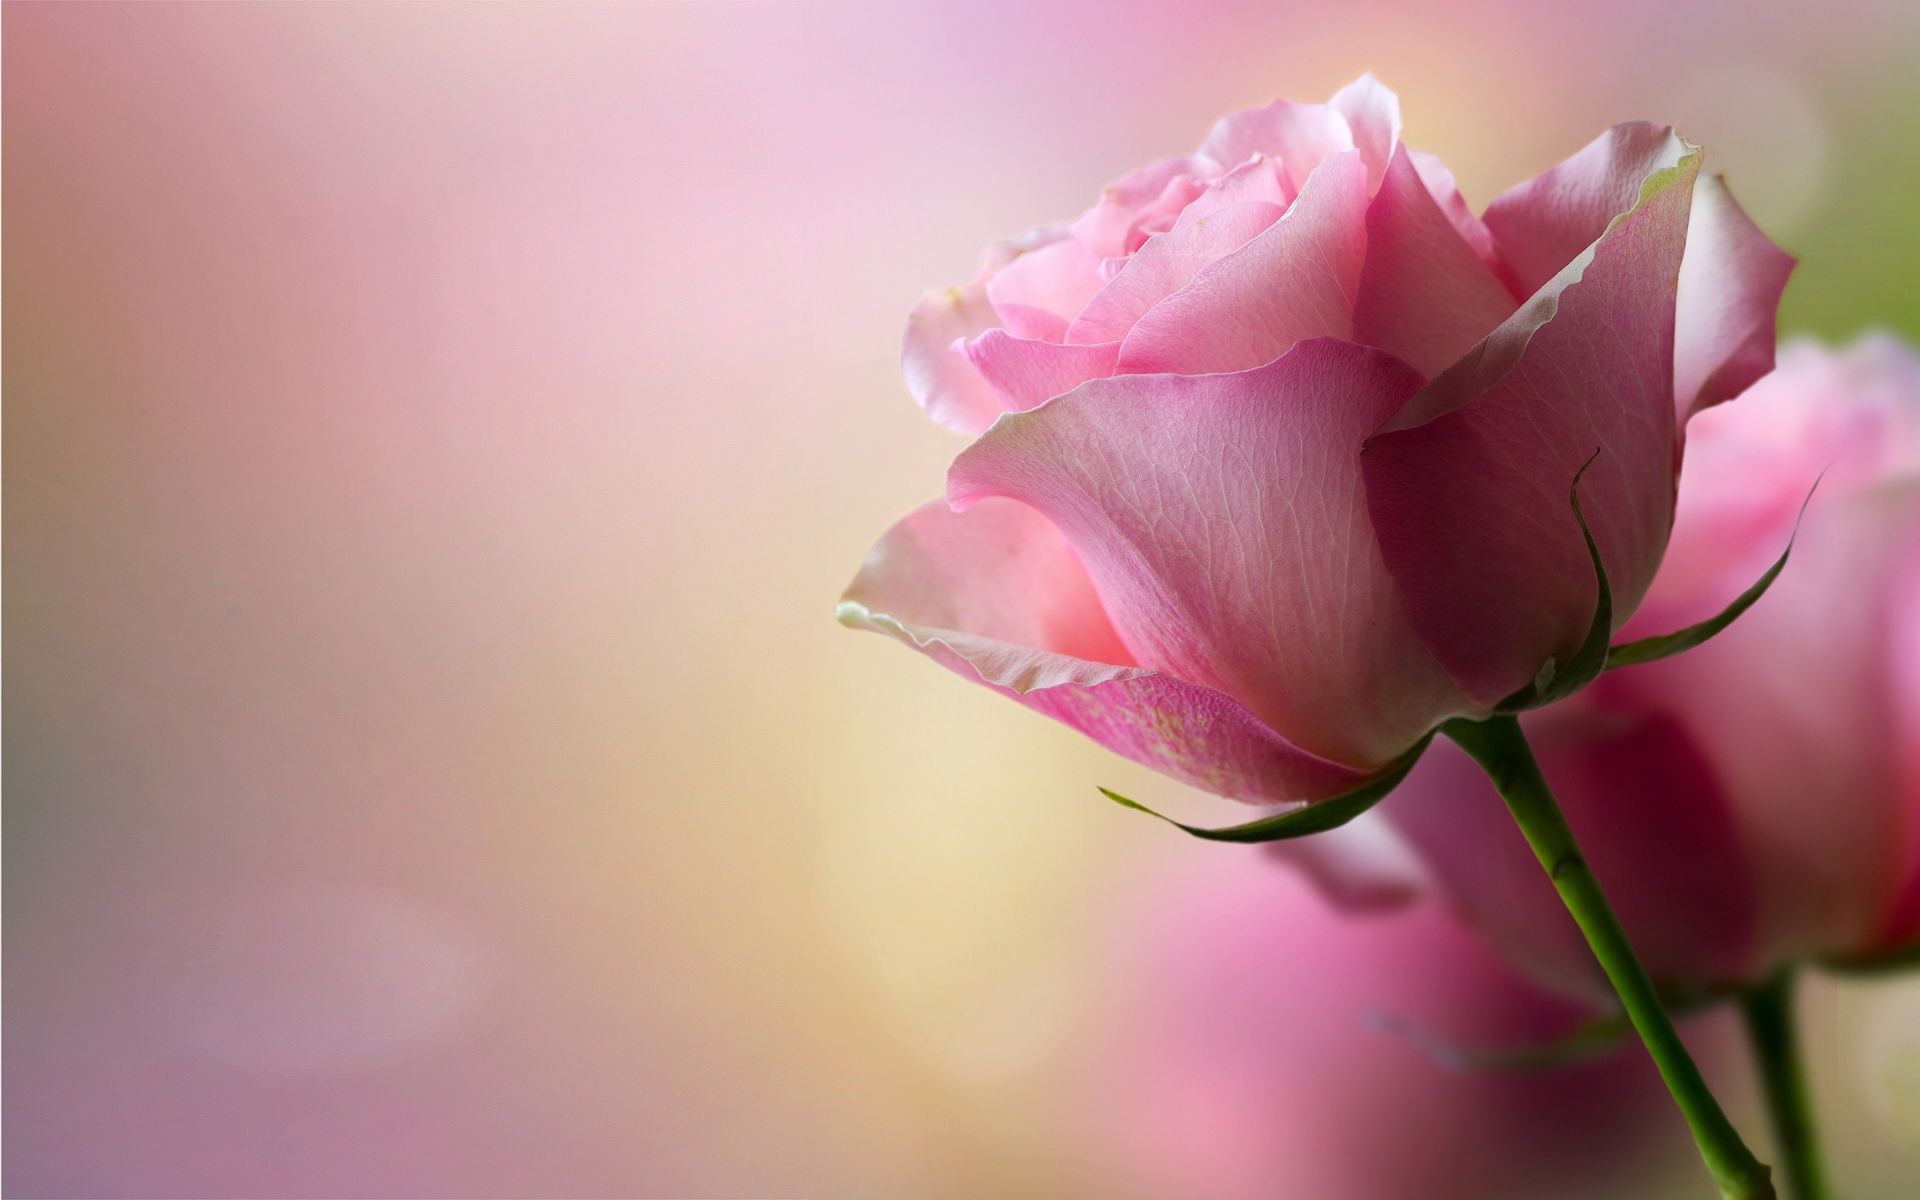 Rose flower image hd and wallpapers Download